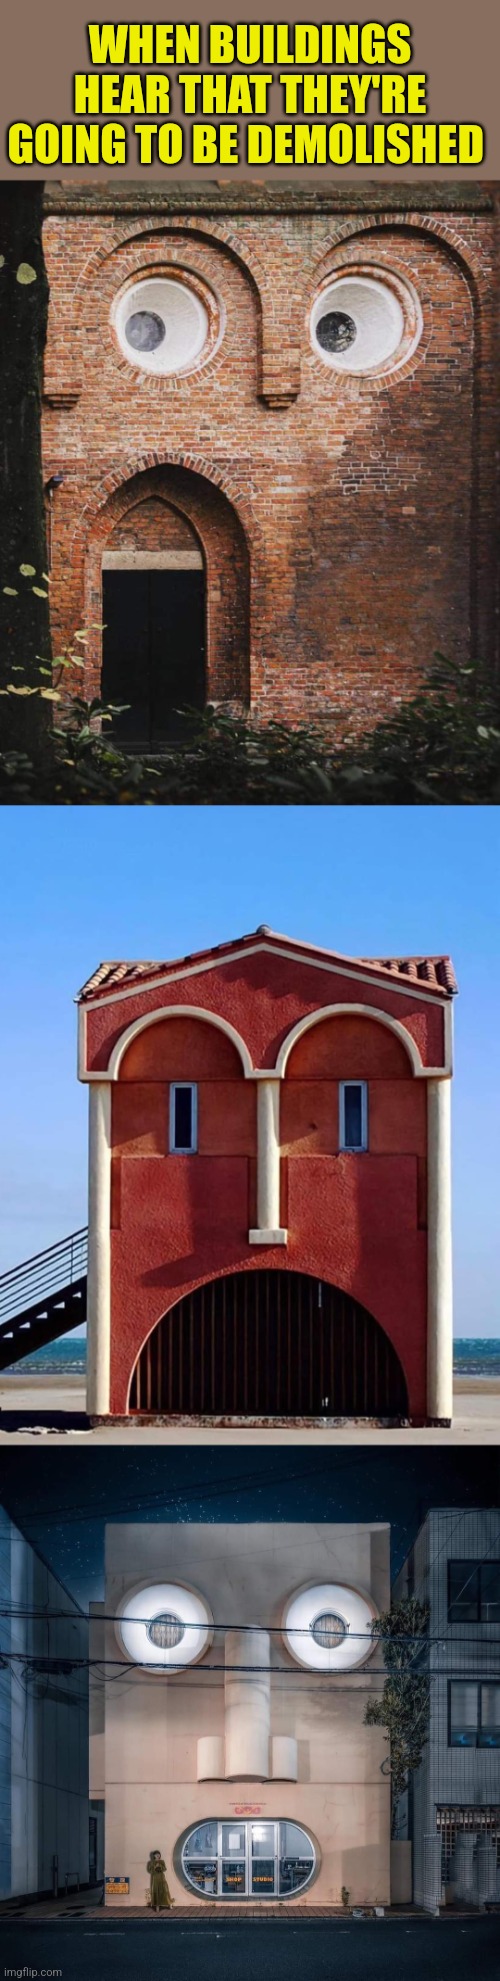 Surprising Archetecture | WHEN BUILDINGS HEAR THAT THEY'RE GOING TO BE DEMOLISHED | image tagged in building,faces,demolition,shocked face,design,funny memes | made w/ Imgflip meme maker